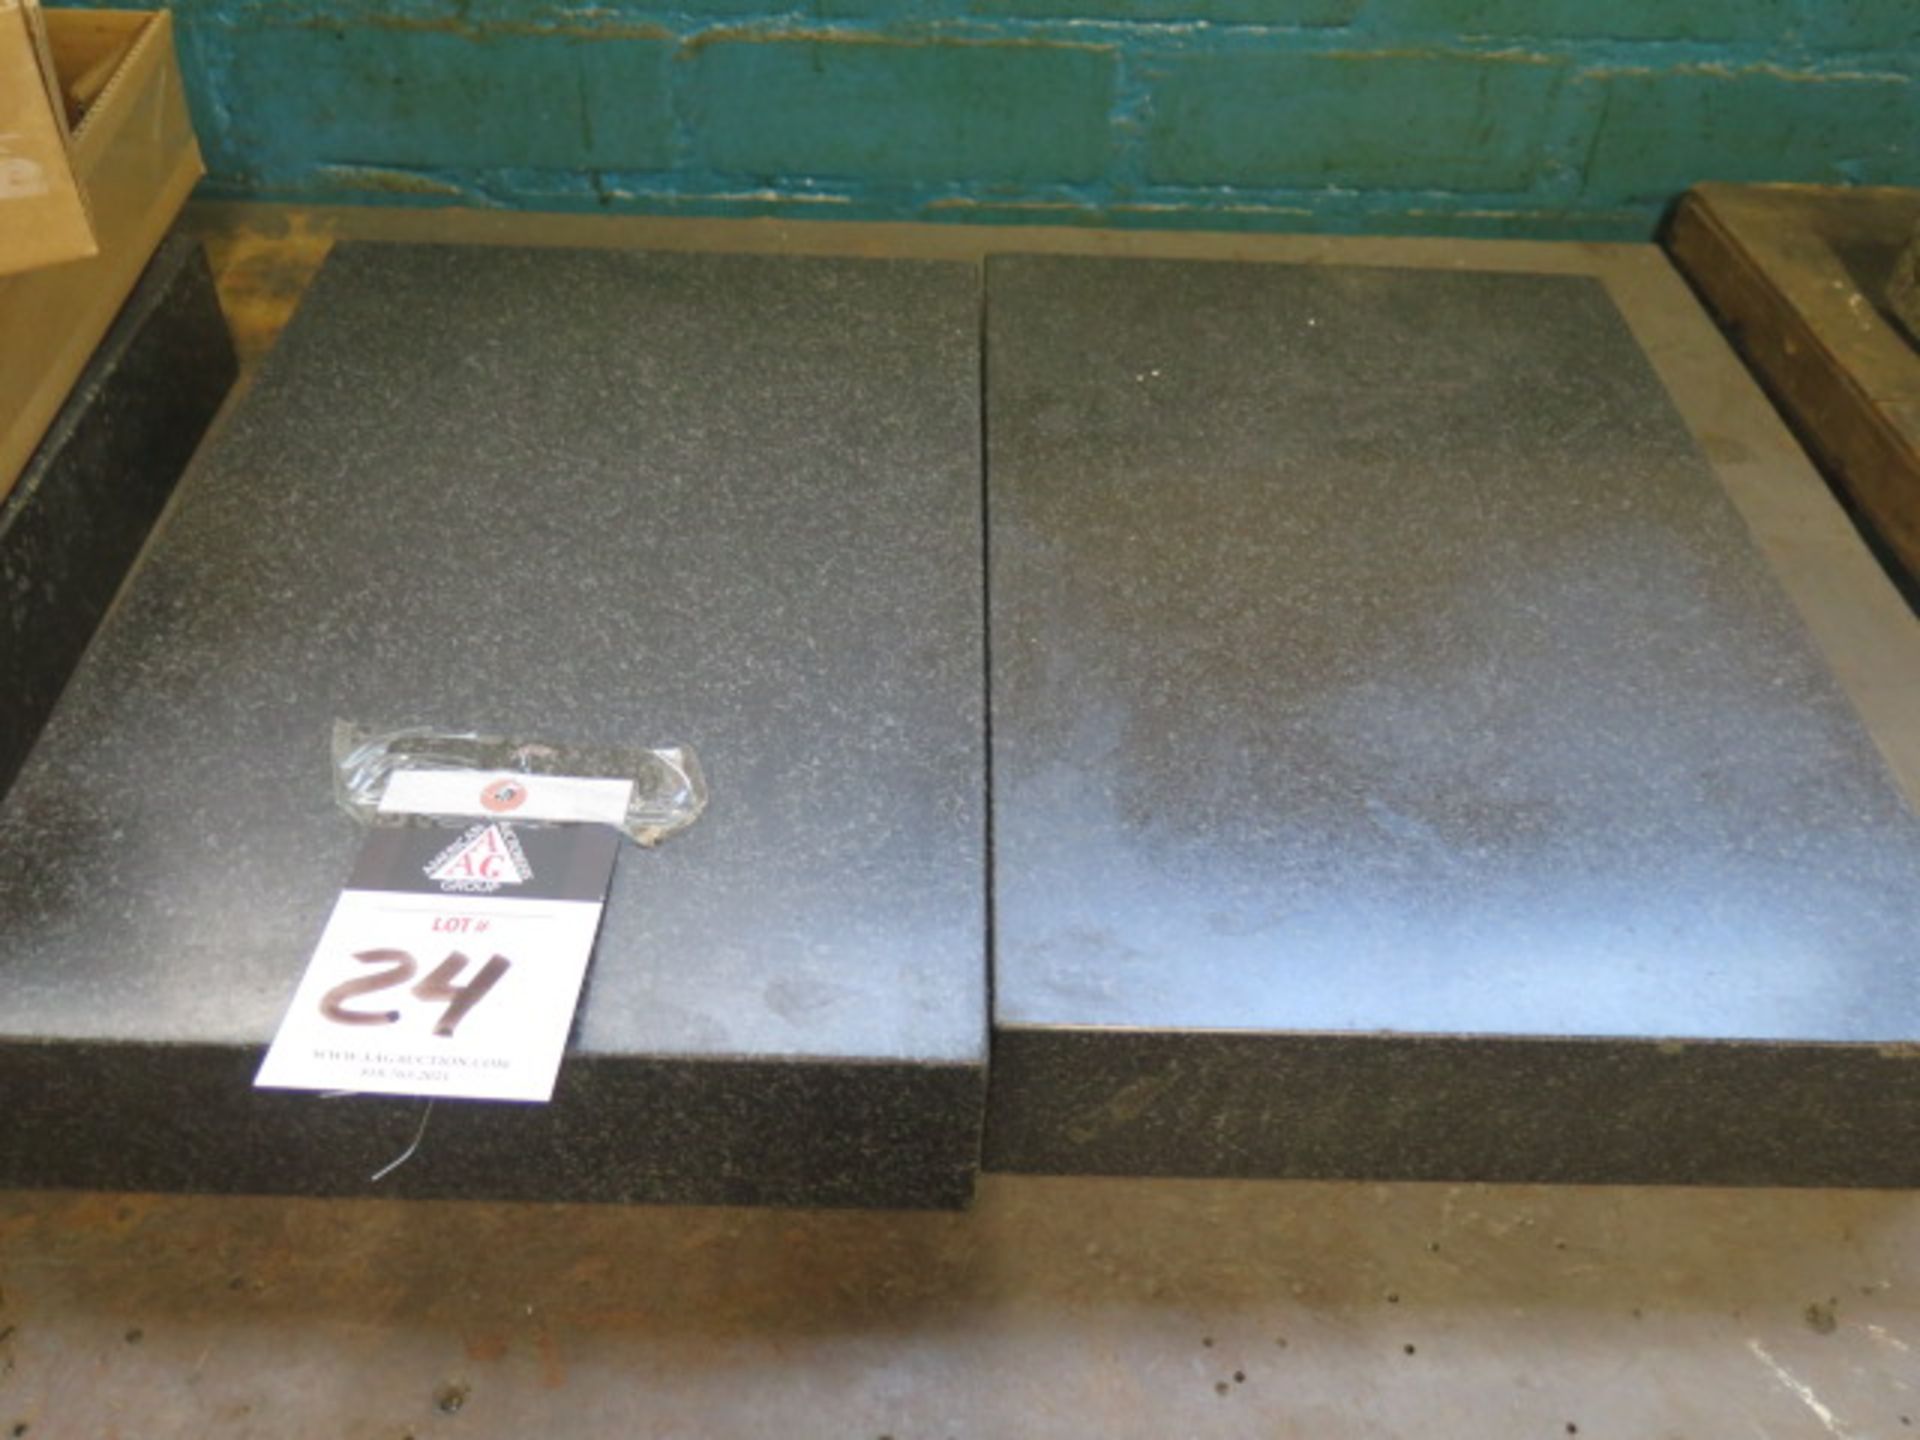 12" x 18" x 3" Granite Surface Plates (2) (SOLD AS-IS - NO WARRANTY)